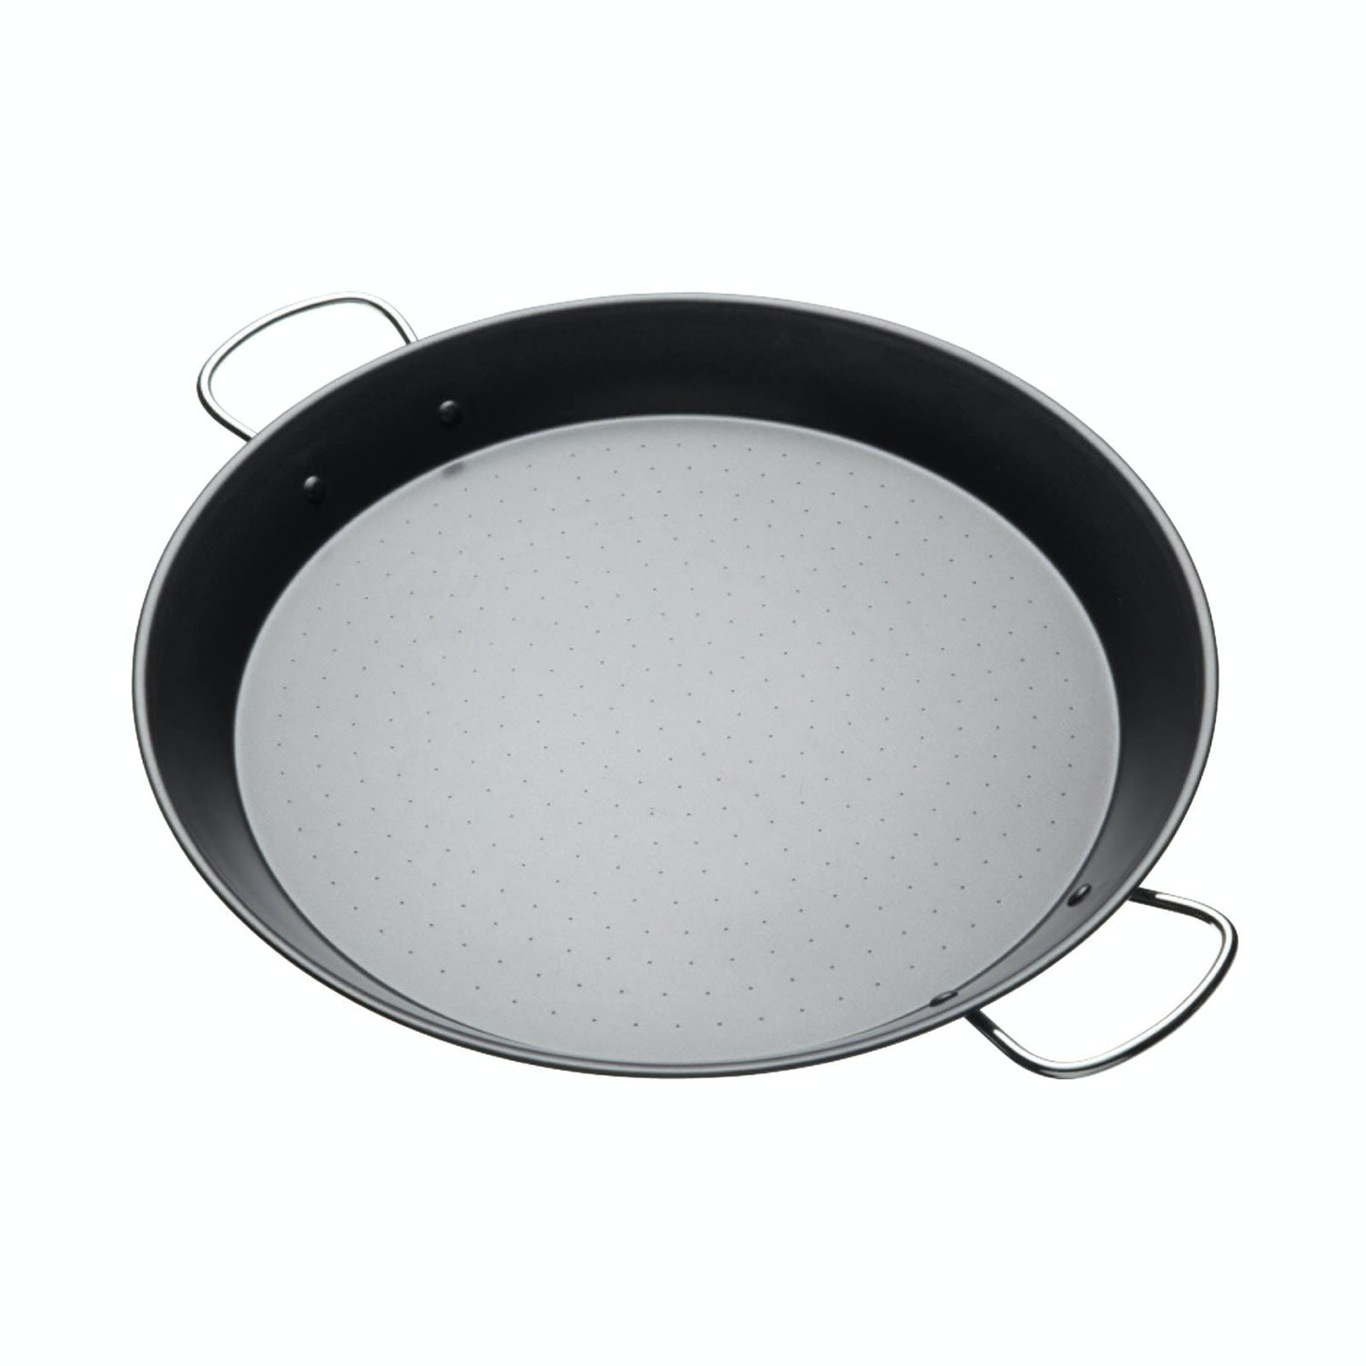 World of Flavours Paella Pan, 40 cm